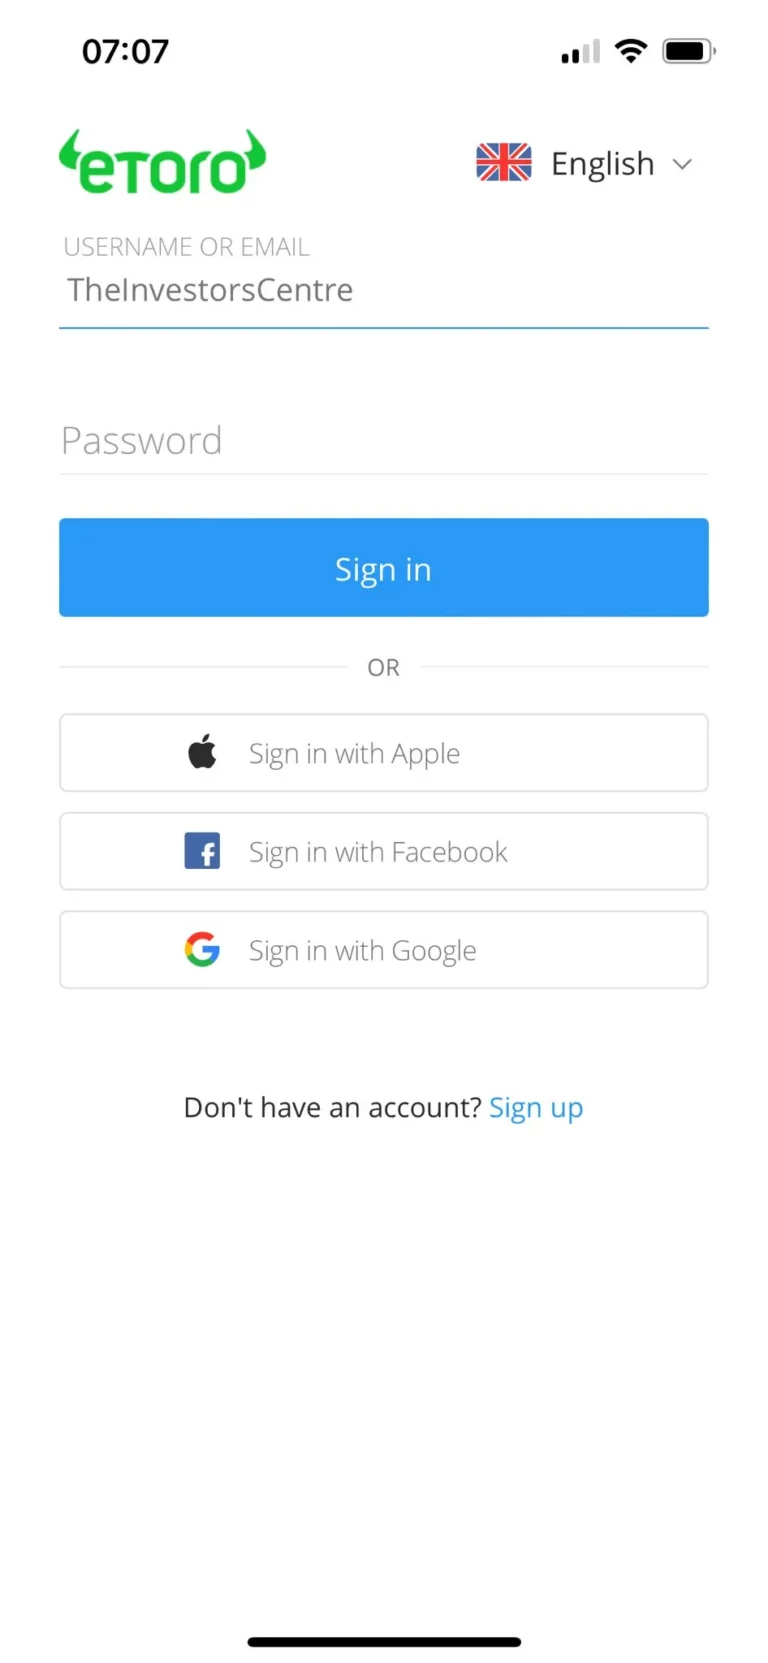 Login interface of a etoro app displaying options for email and social sign-in.